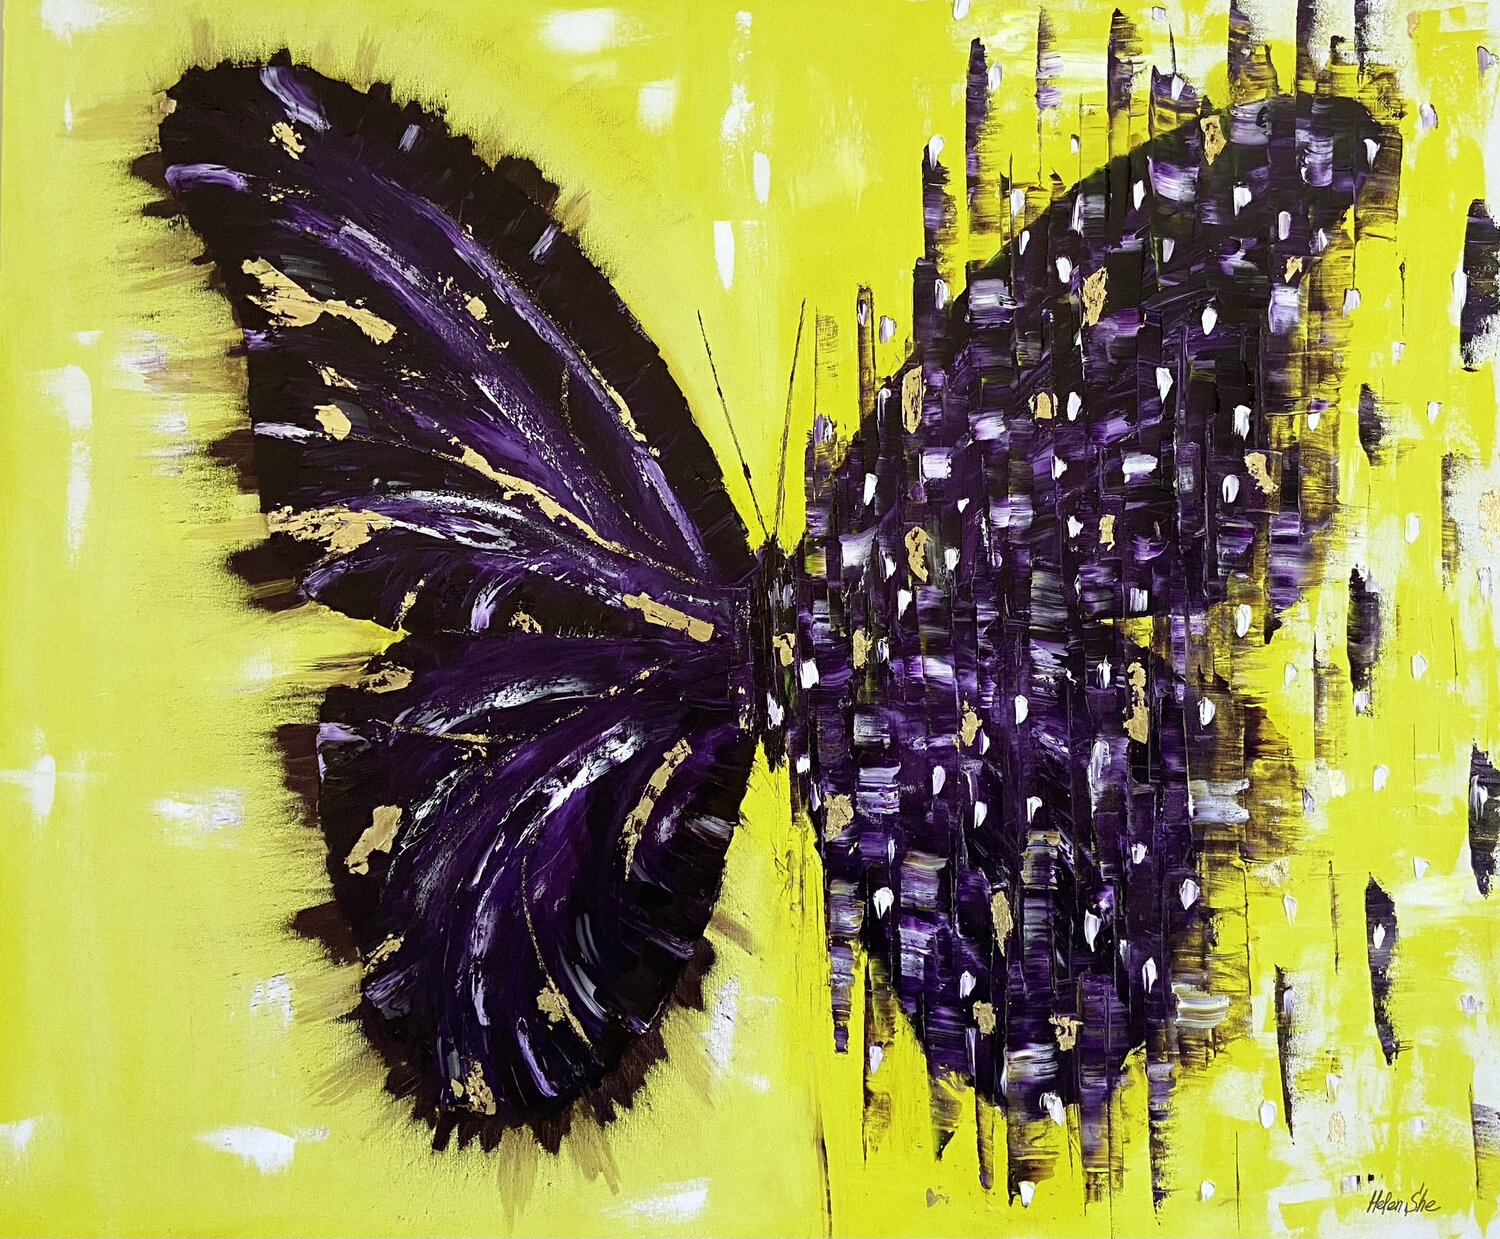 Butterfly Louis Vuitton - Cheeky Bunny - Ink on Canvas